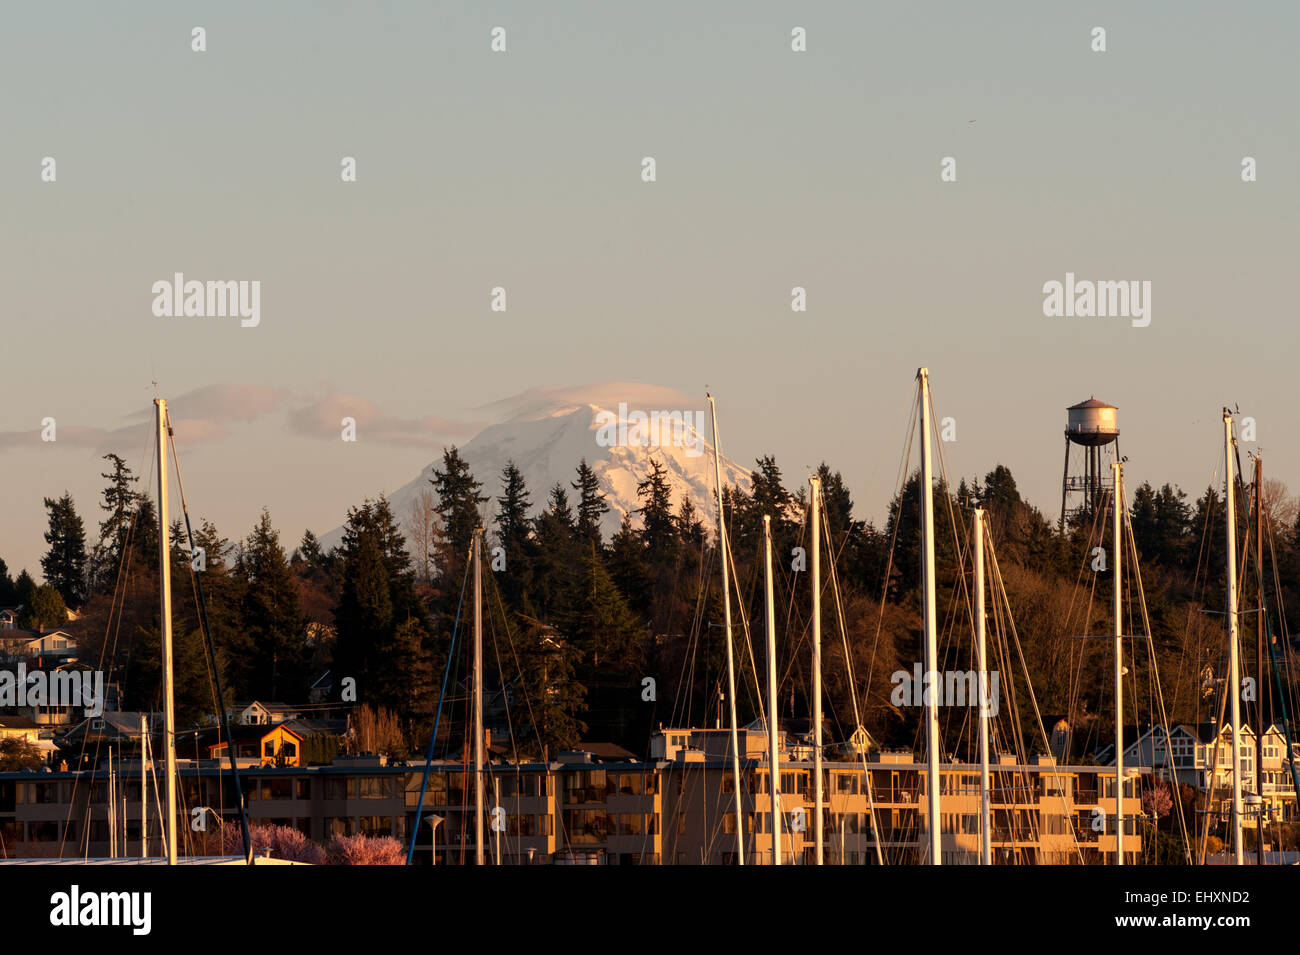 Mt. Rainier with a marina in the foreground Stock Photo